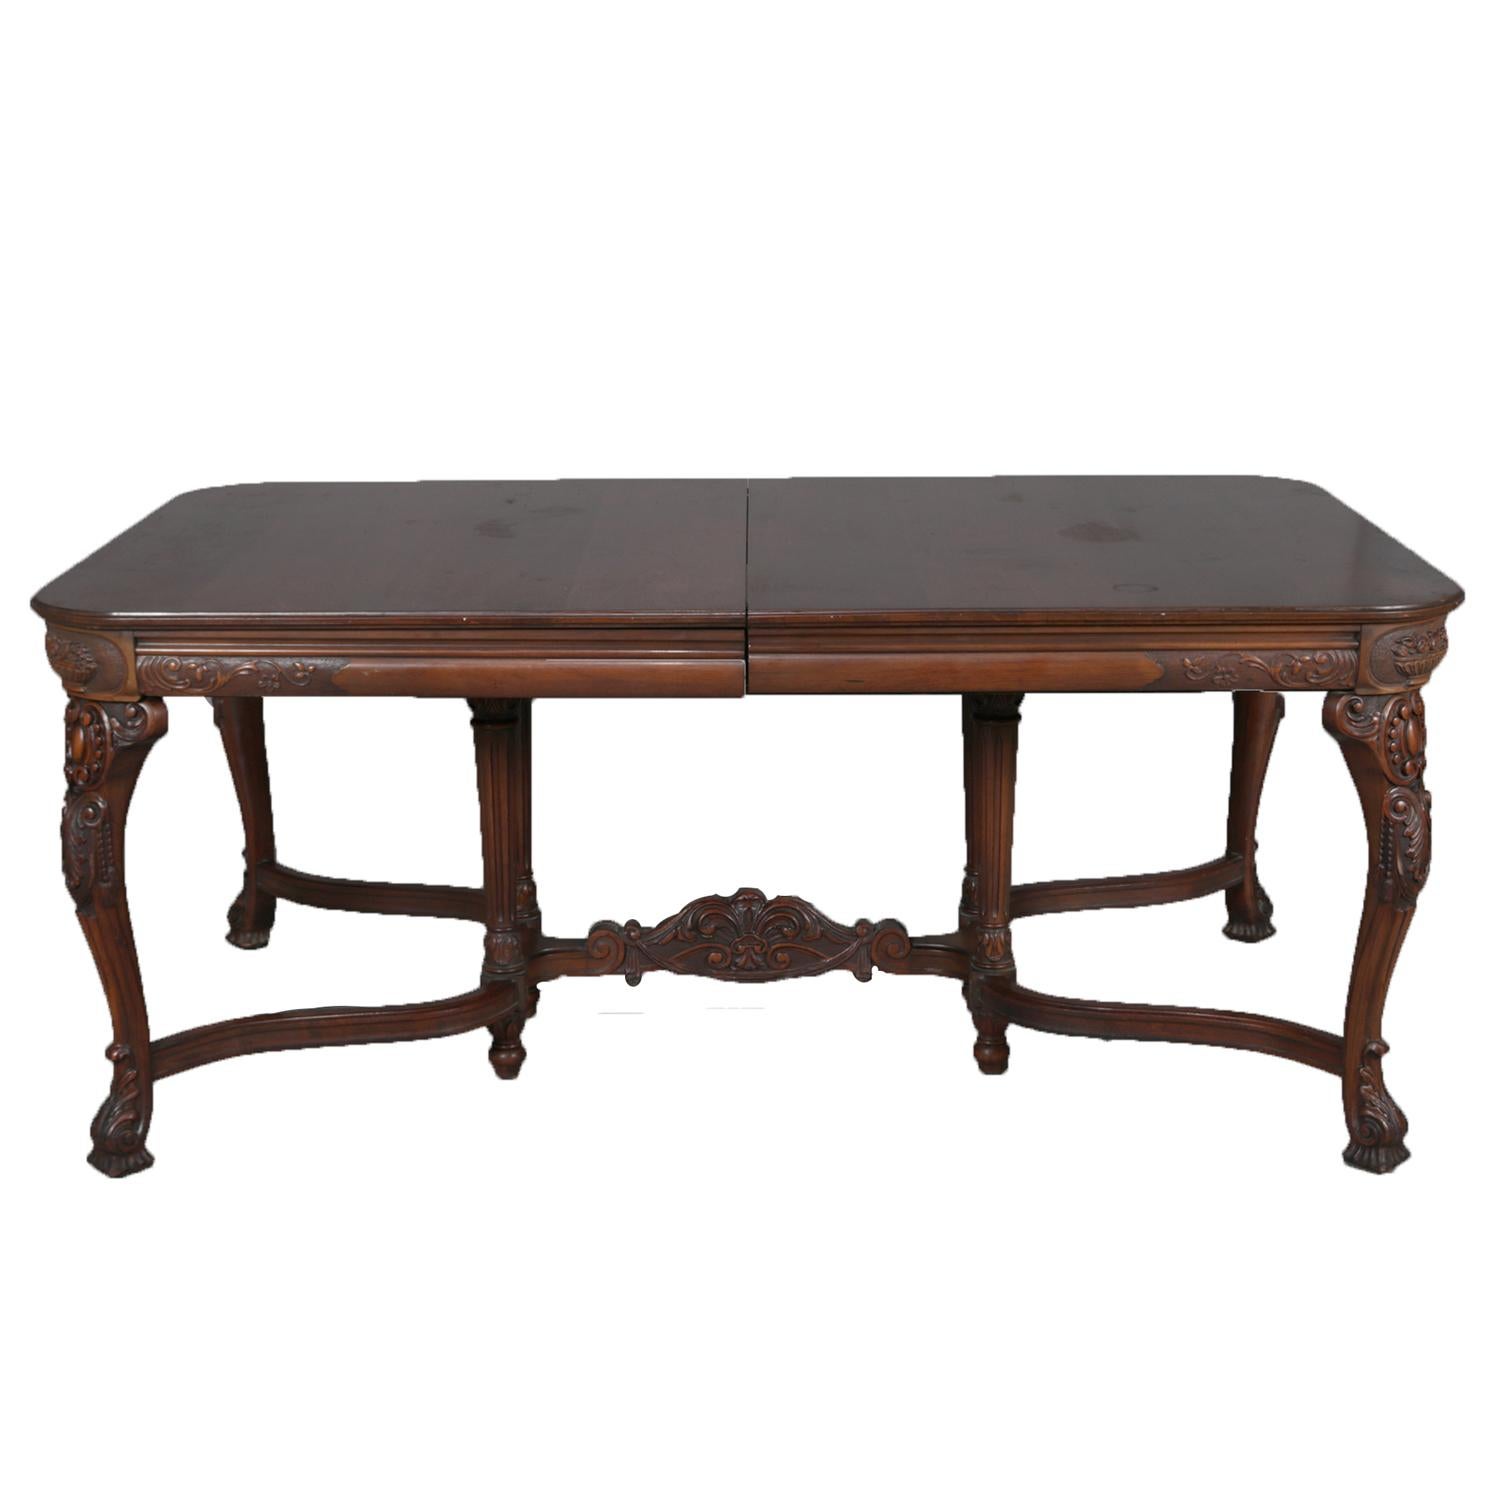 English Chippendale style carved walnut dining set includes table with carved skirt and raised on cabriole legs with shaped and carved stretcher and having four skirted leaves; chair set include two arm and four side with carved and pieced backs